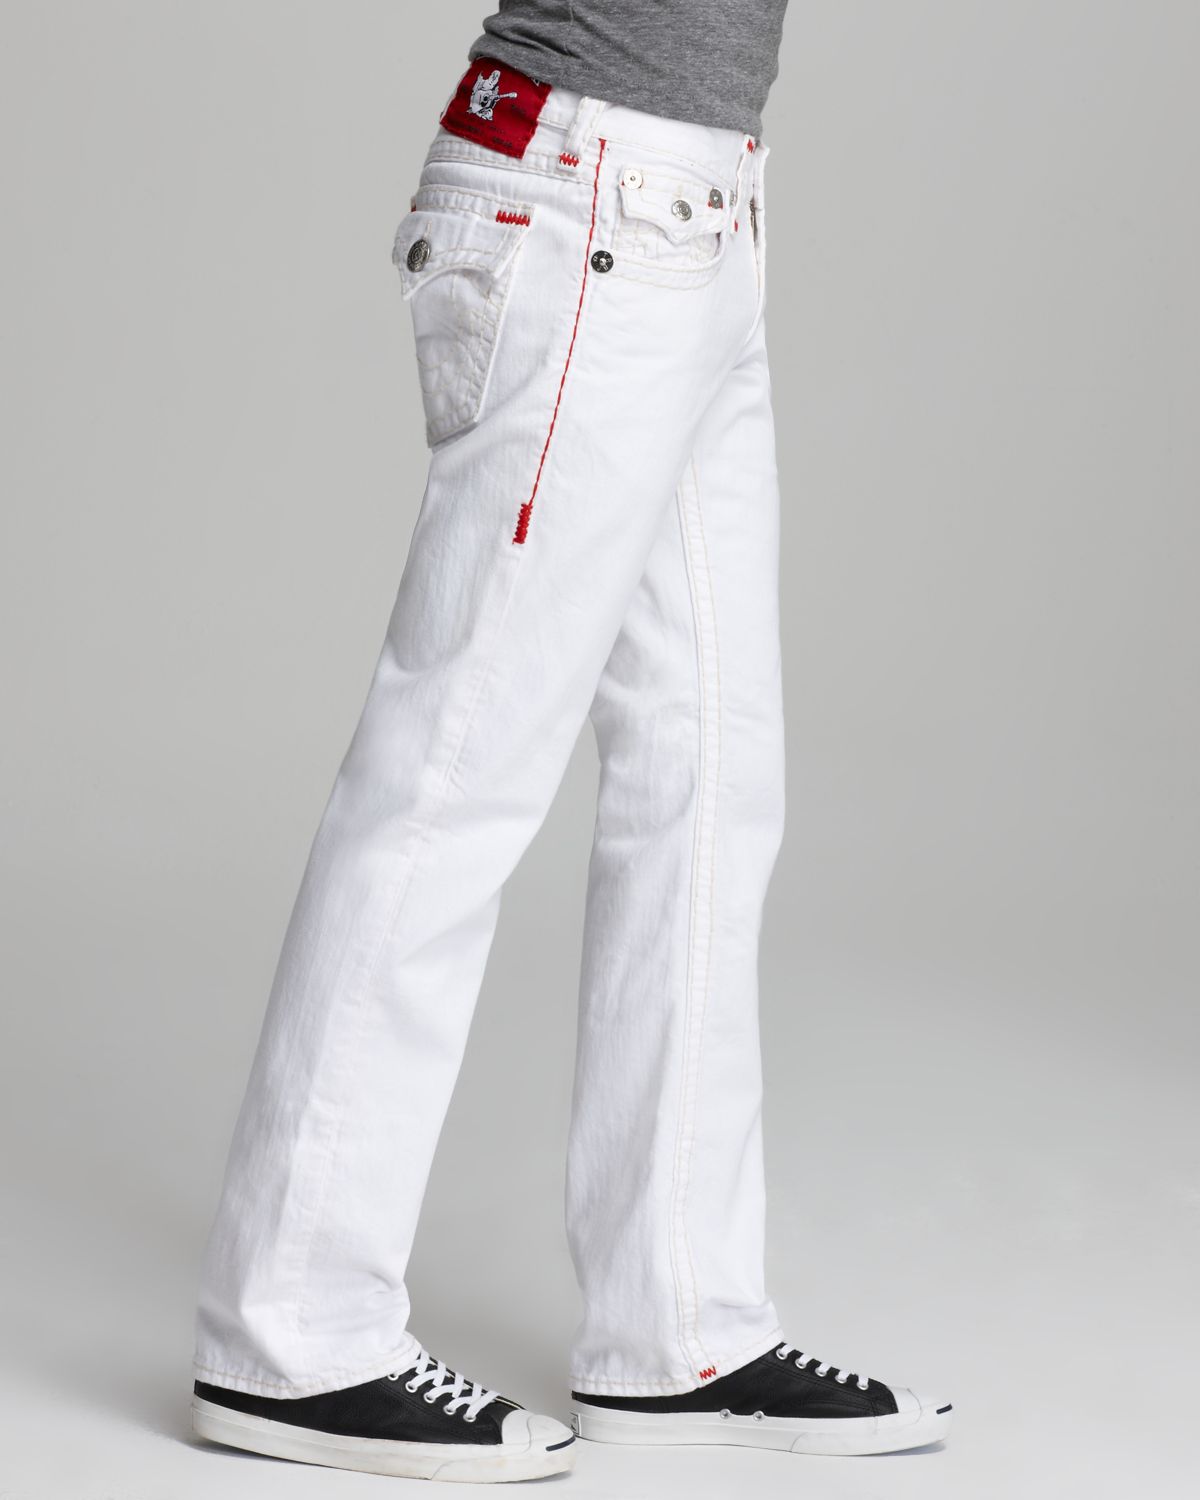 True religion Jeans Ricky Super T Straight Fit in Optic White in ...